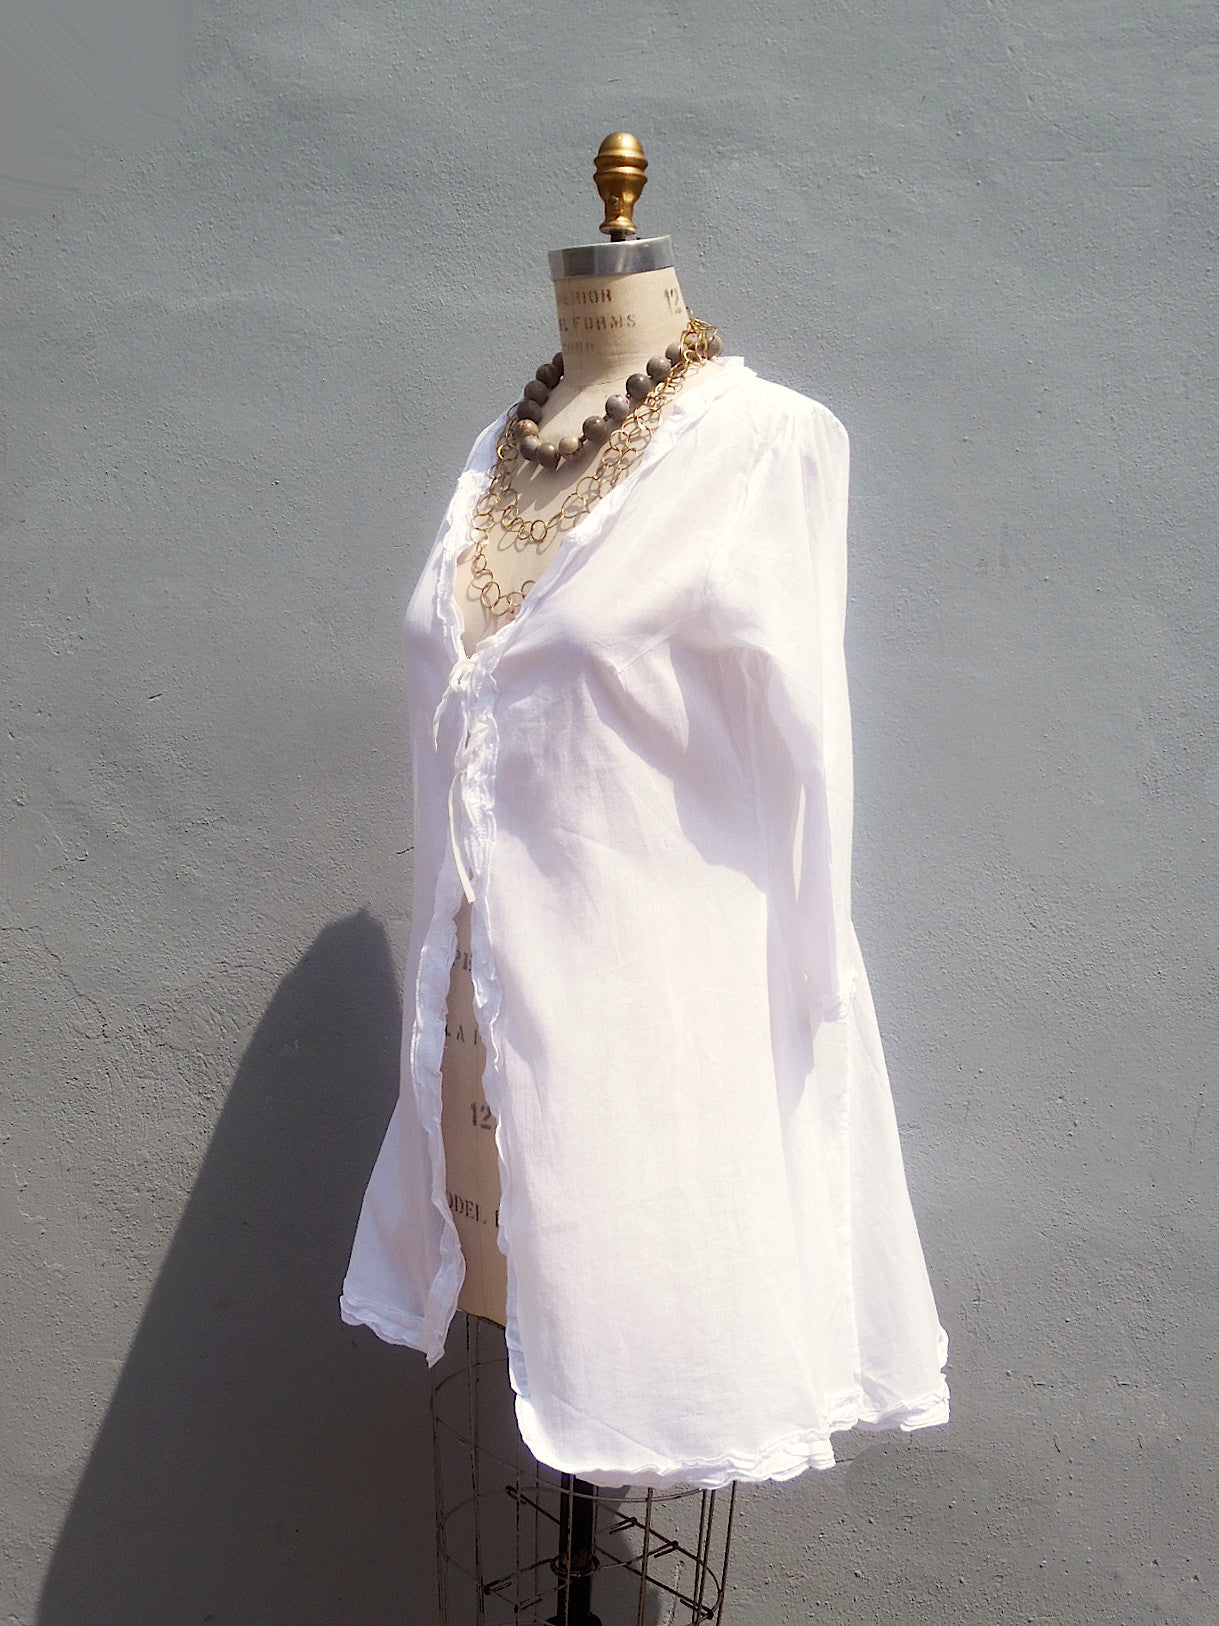 The Lala Beach Cover Up White